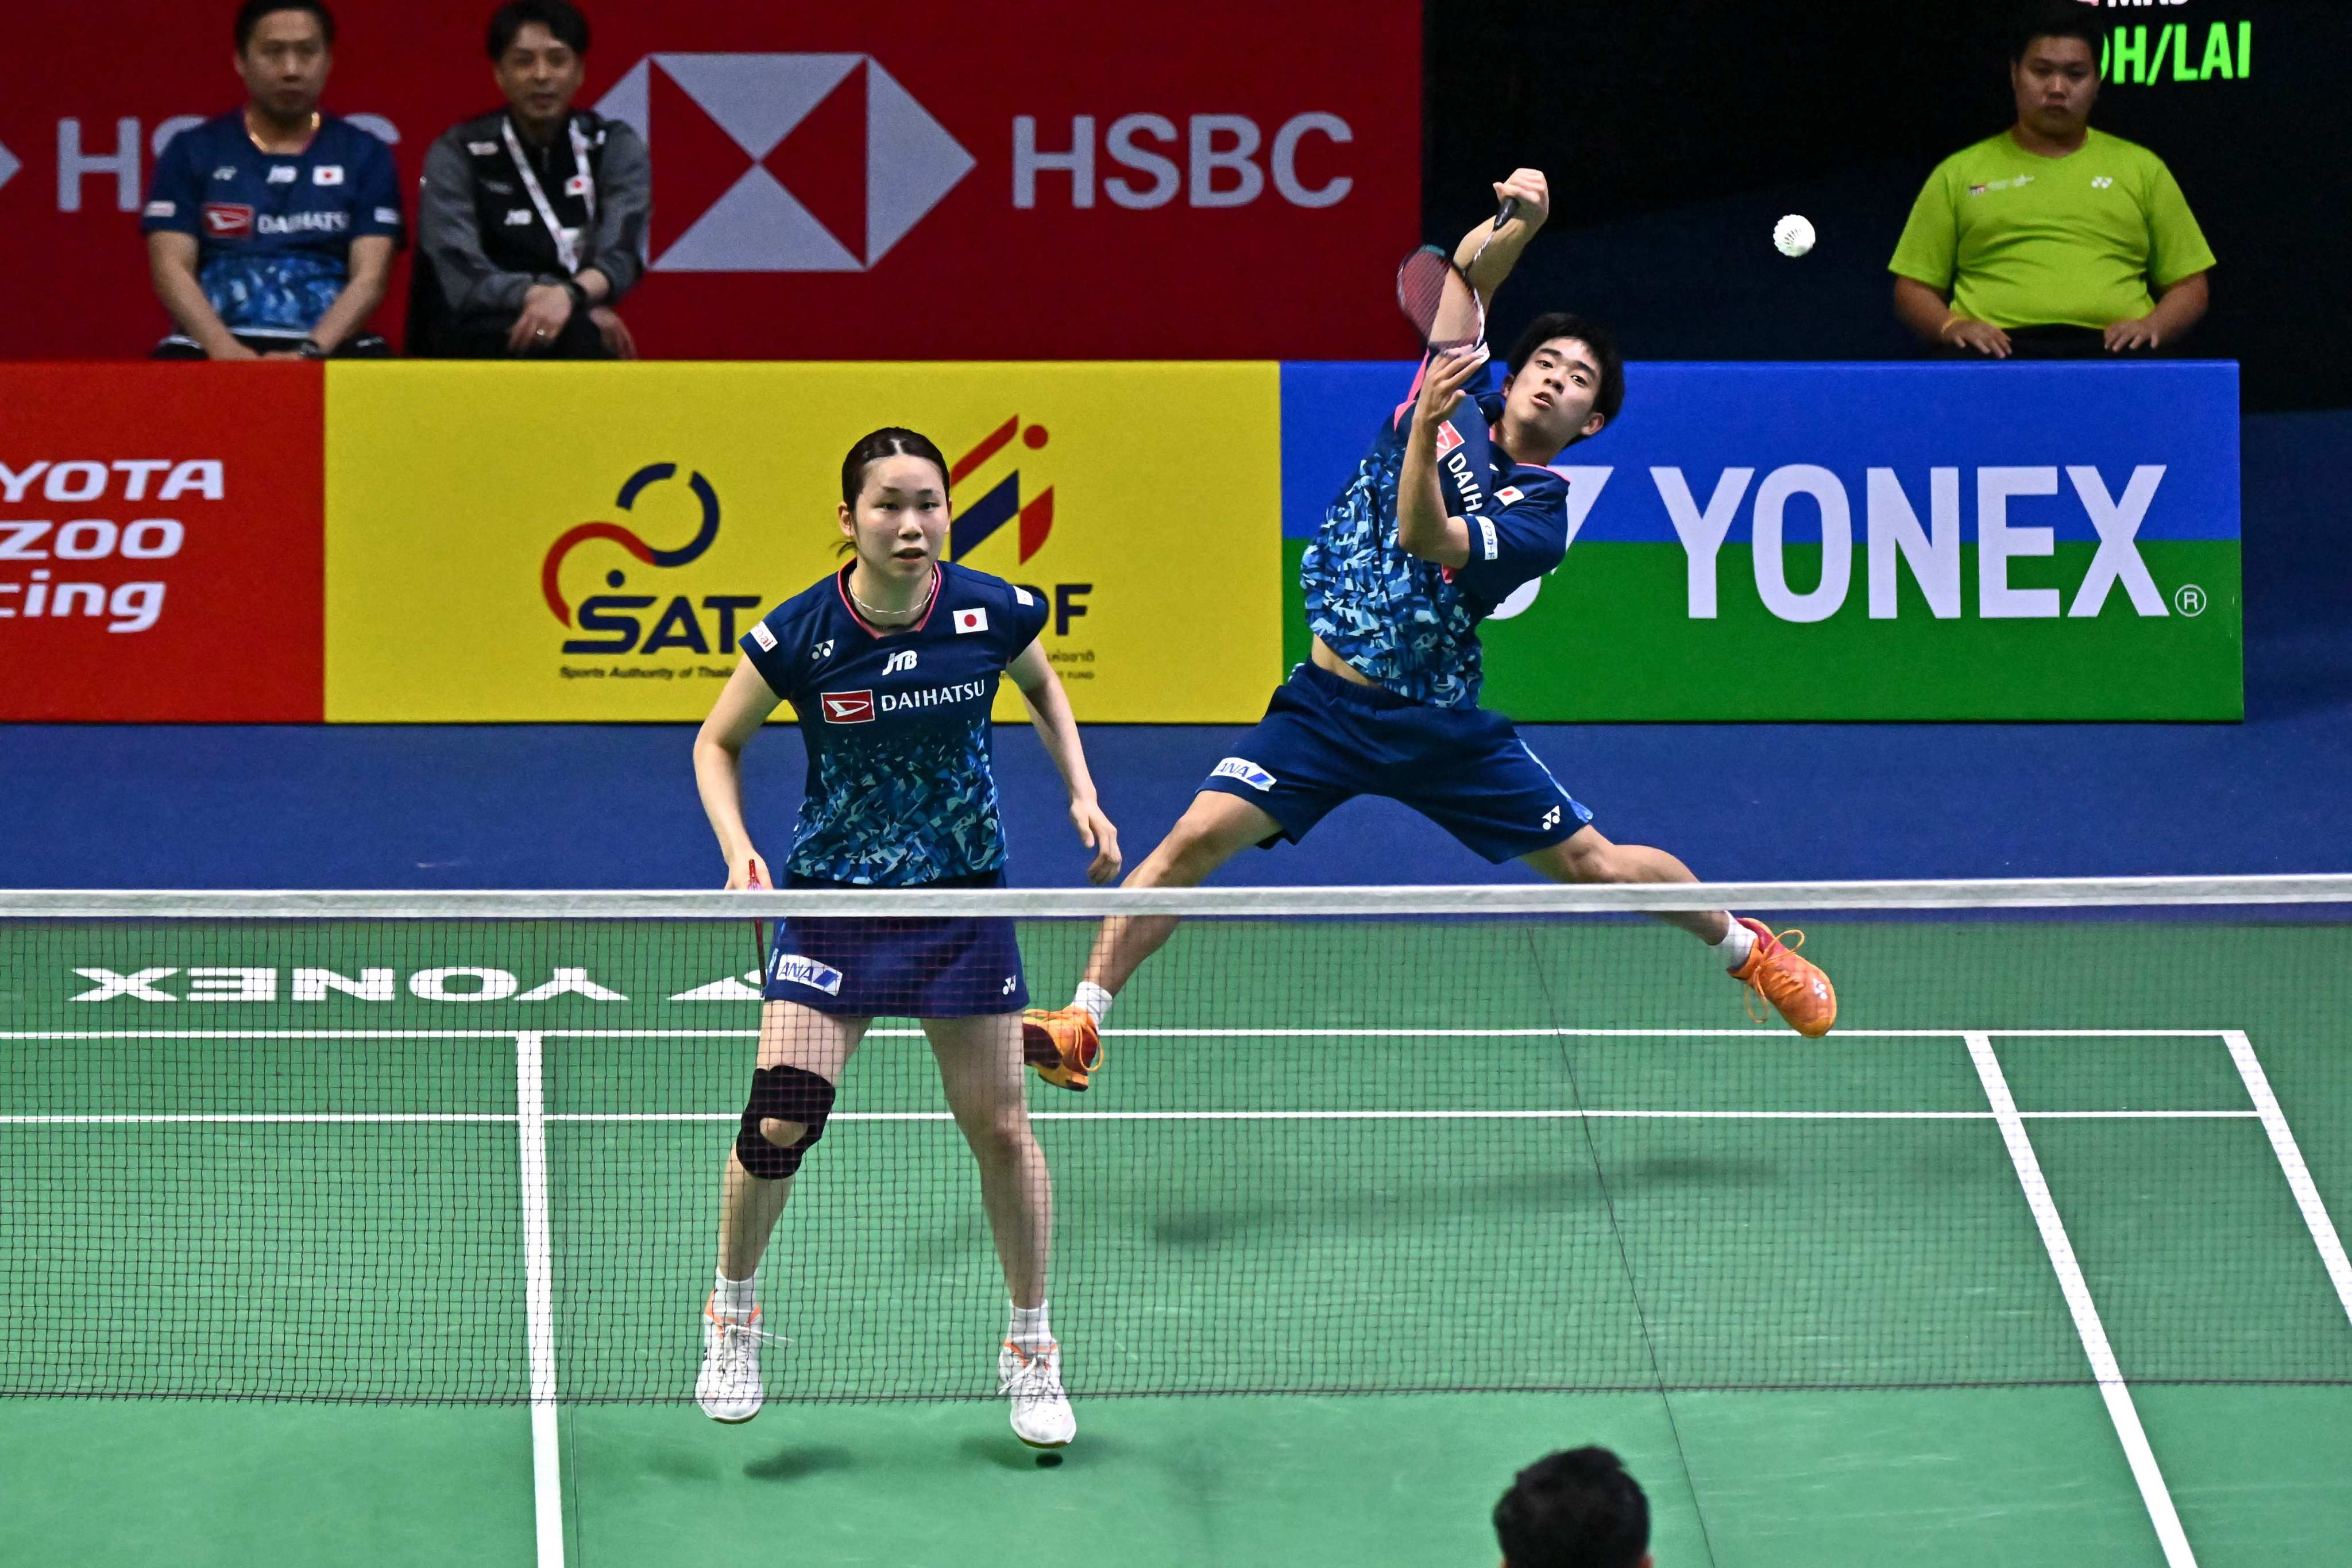 Japan’s Hiroki Midorikawa (right) hits a return as teammate Natsu Saito watches, against Indonesia’s Zacharia Sumanti and Hediana Julimarbela during their mixed doubles match at the 2023 Thailand Open on Wednesday. Photo: AFP